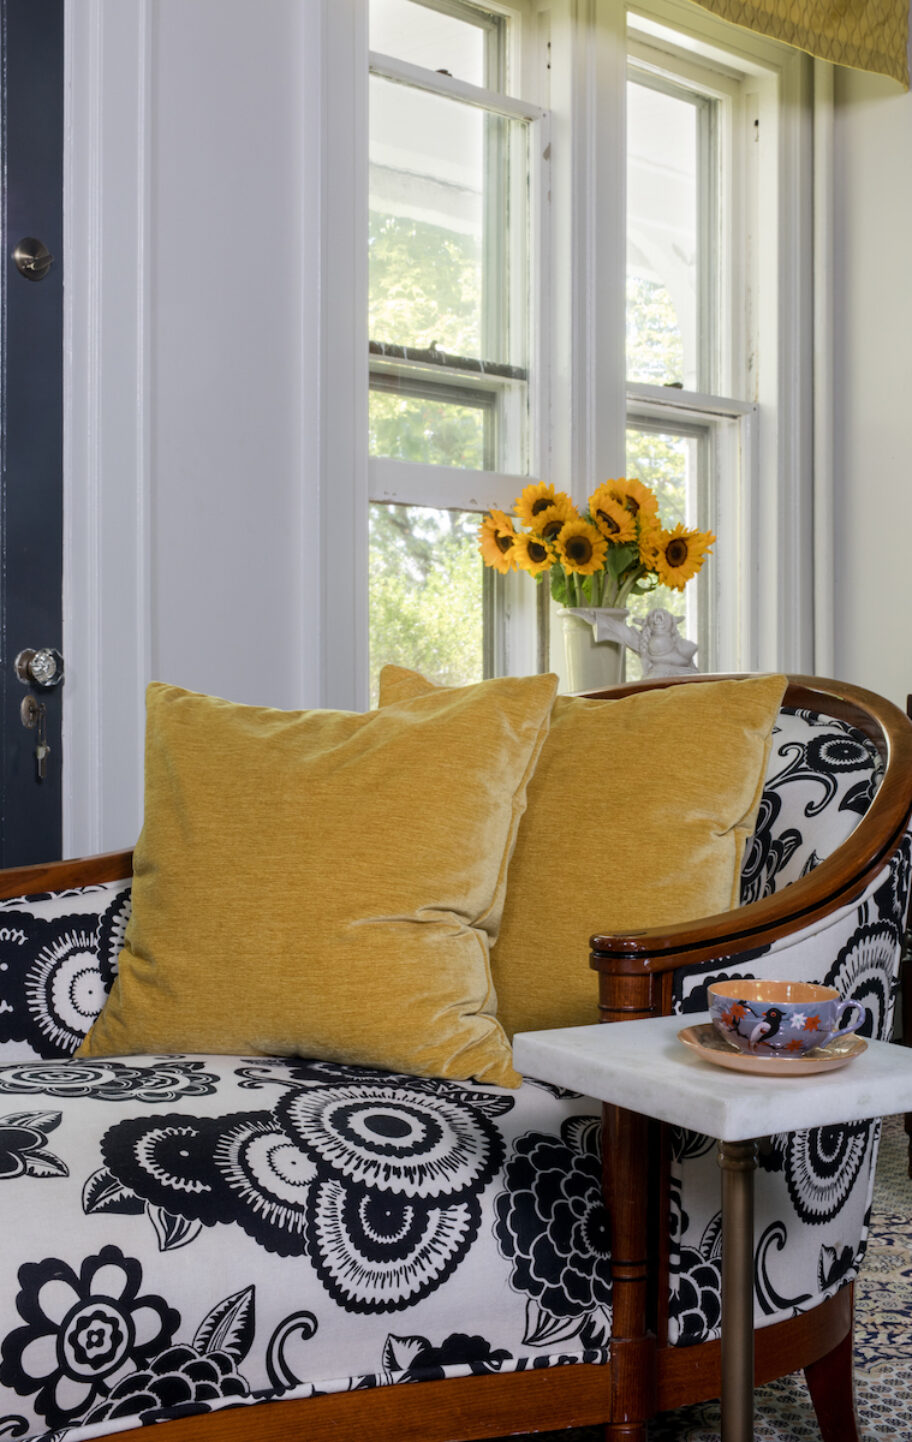 chaise-lounge-chair-mustard-yellow-accent-pillows